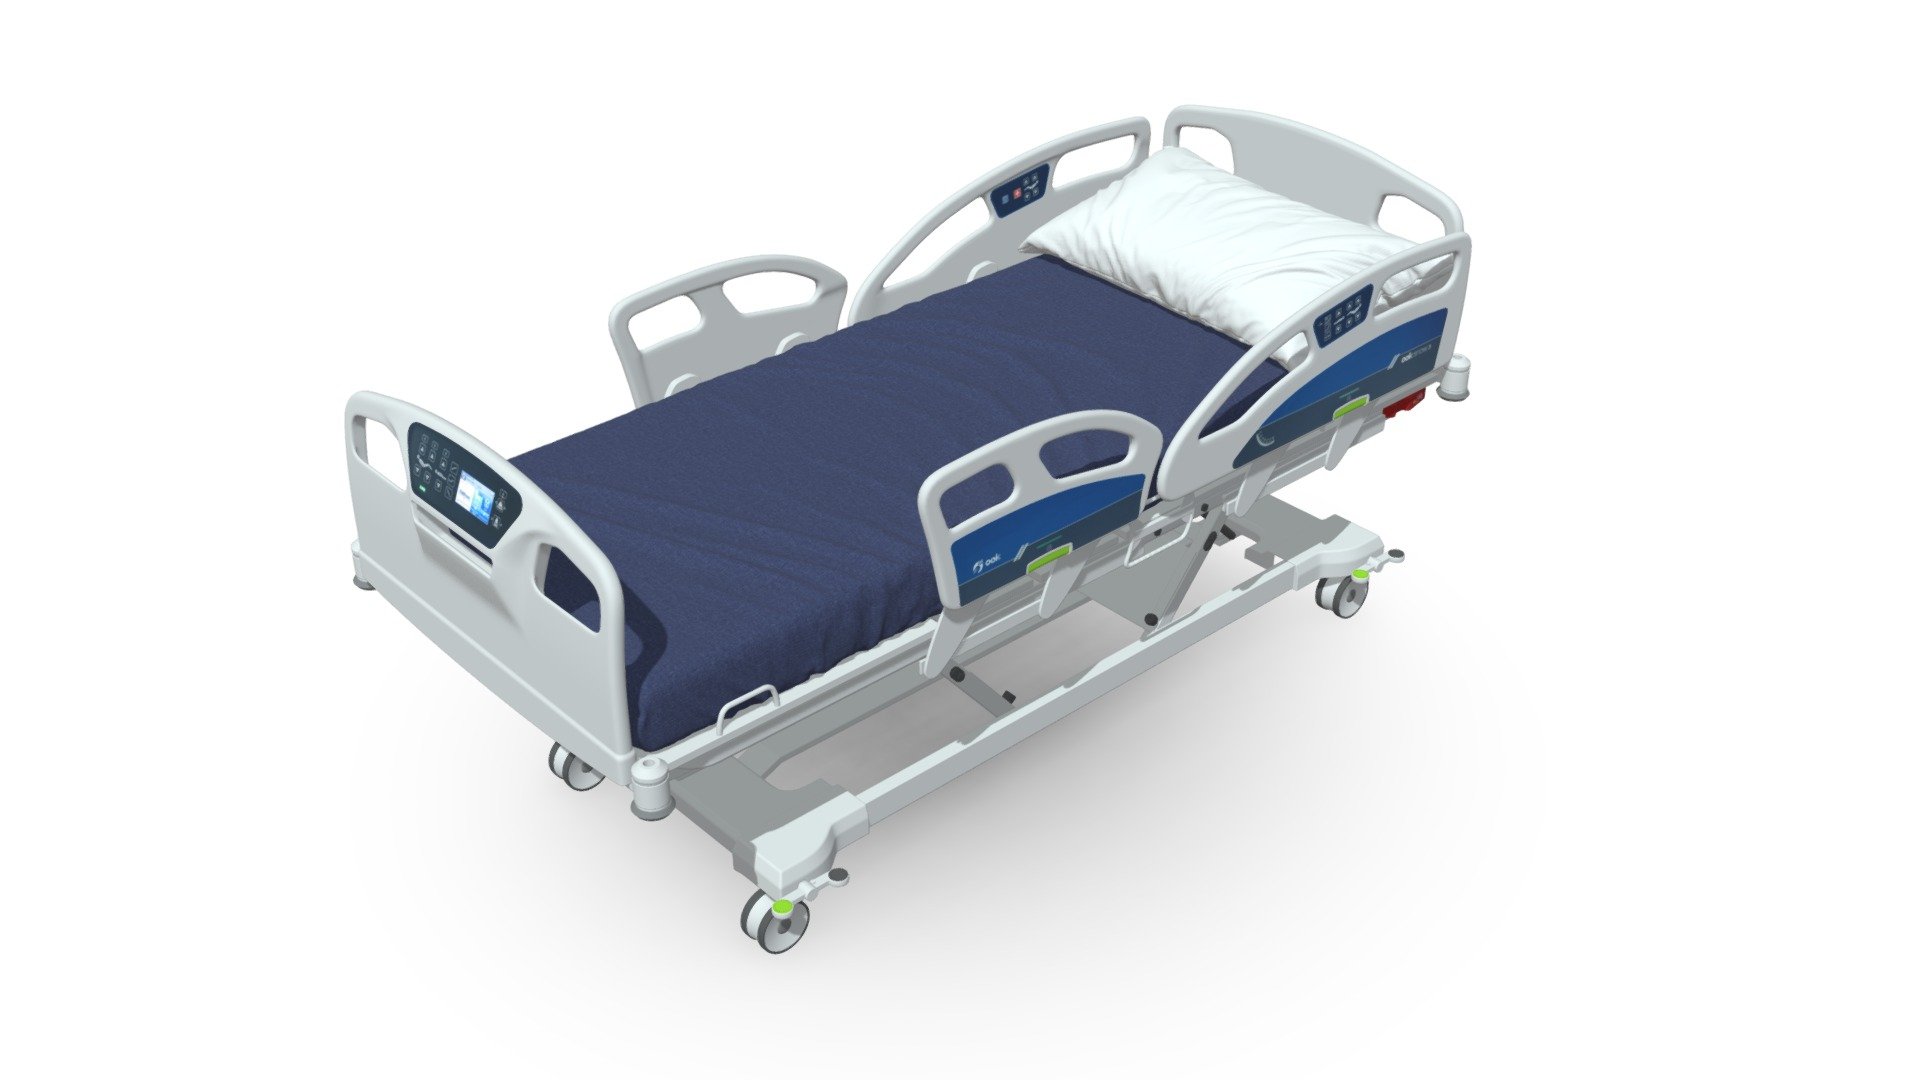 Medical bed with a lifting mechanism for hospitals and pediatric wards.
Additional archive includes 3d models in the format:
.max 2017 Standart, Vray, Corona render, .obj as well as all textures 3d model